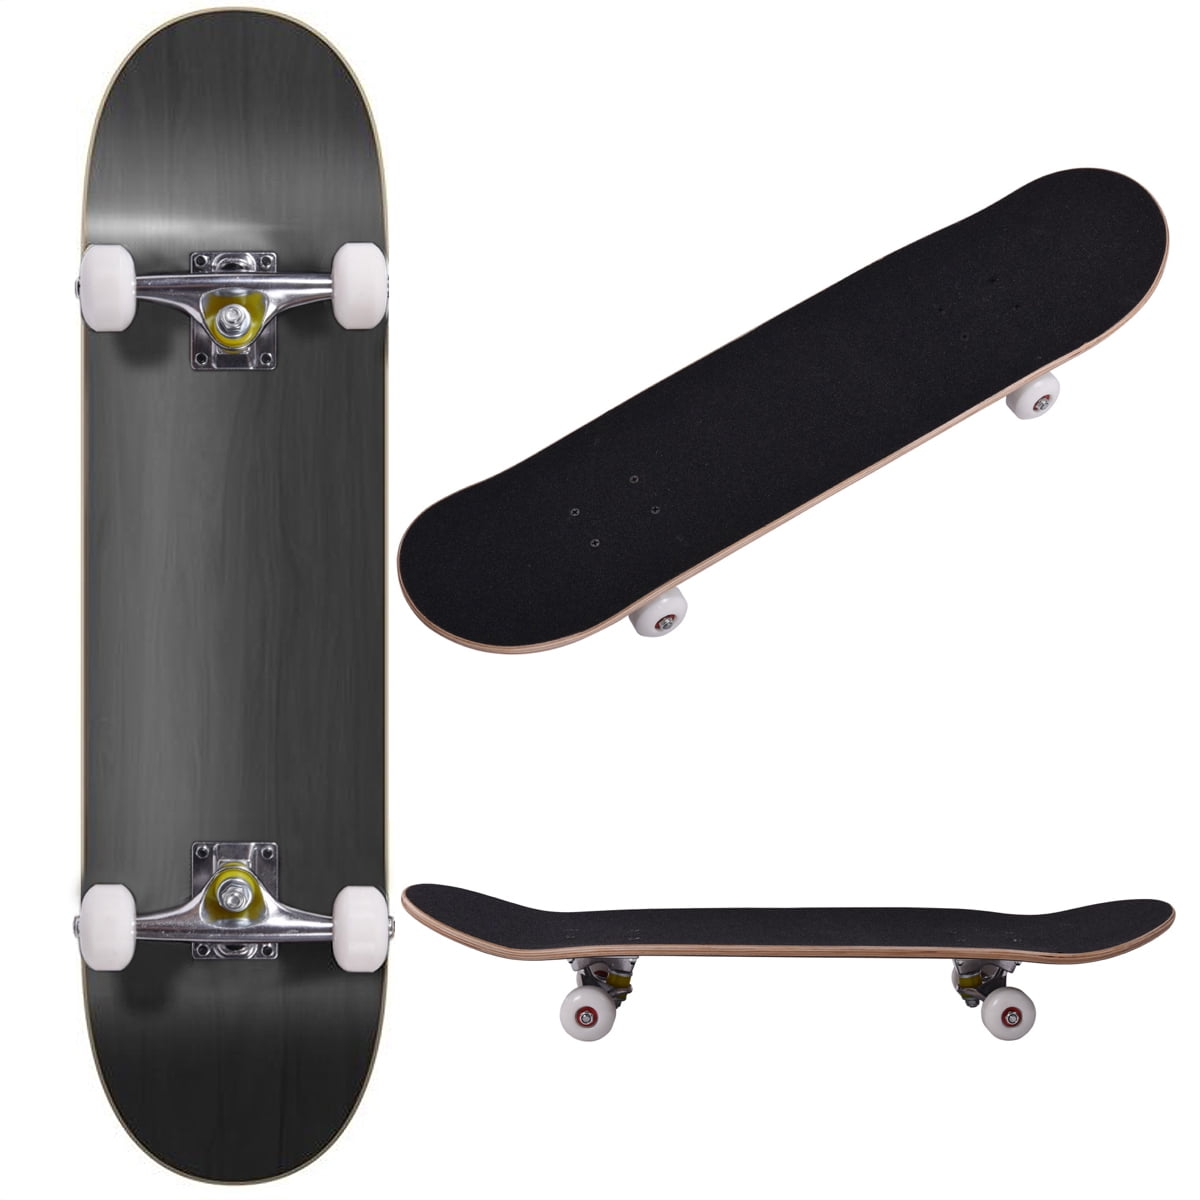 Adult Kids Complete Skateboard Stained BLACK 31in Skateboards Ready to ride US 